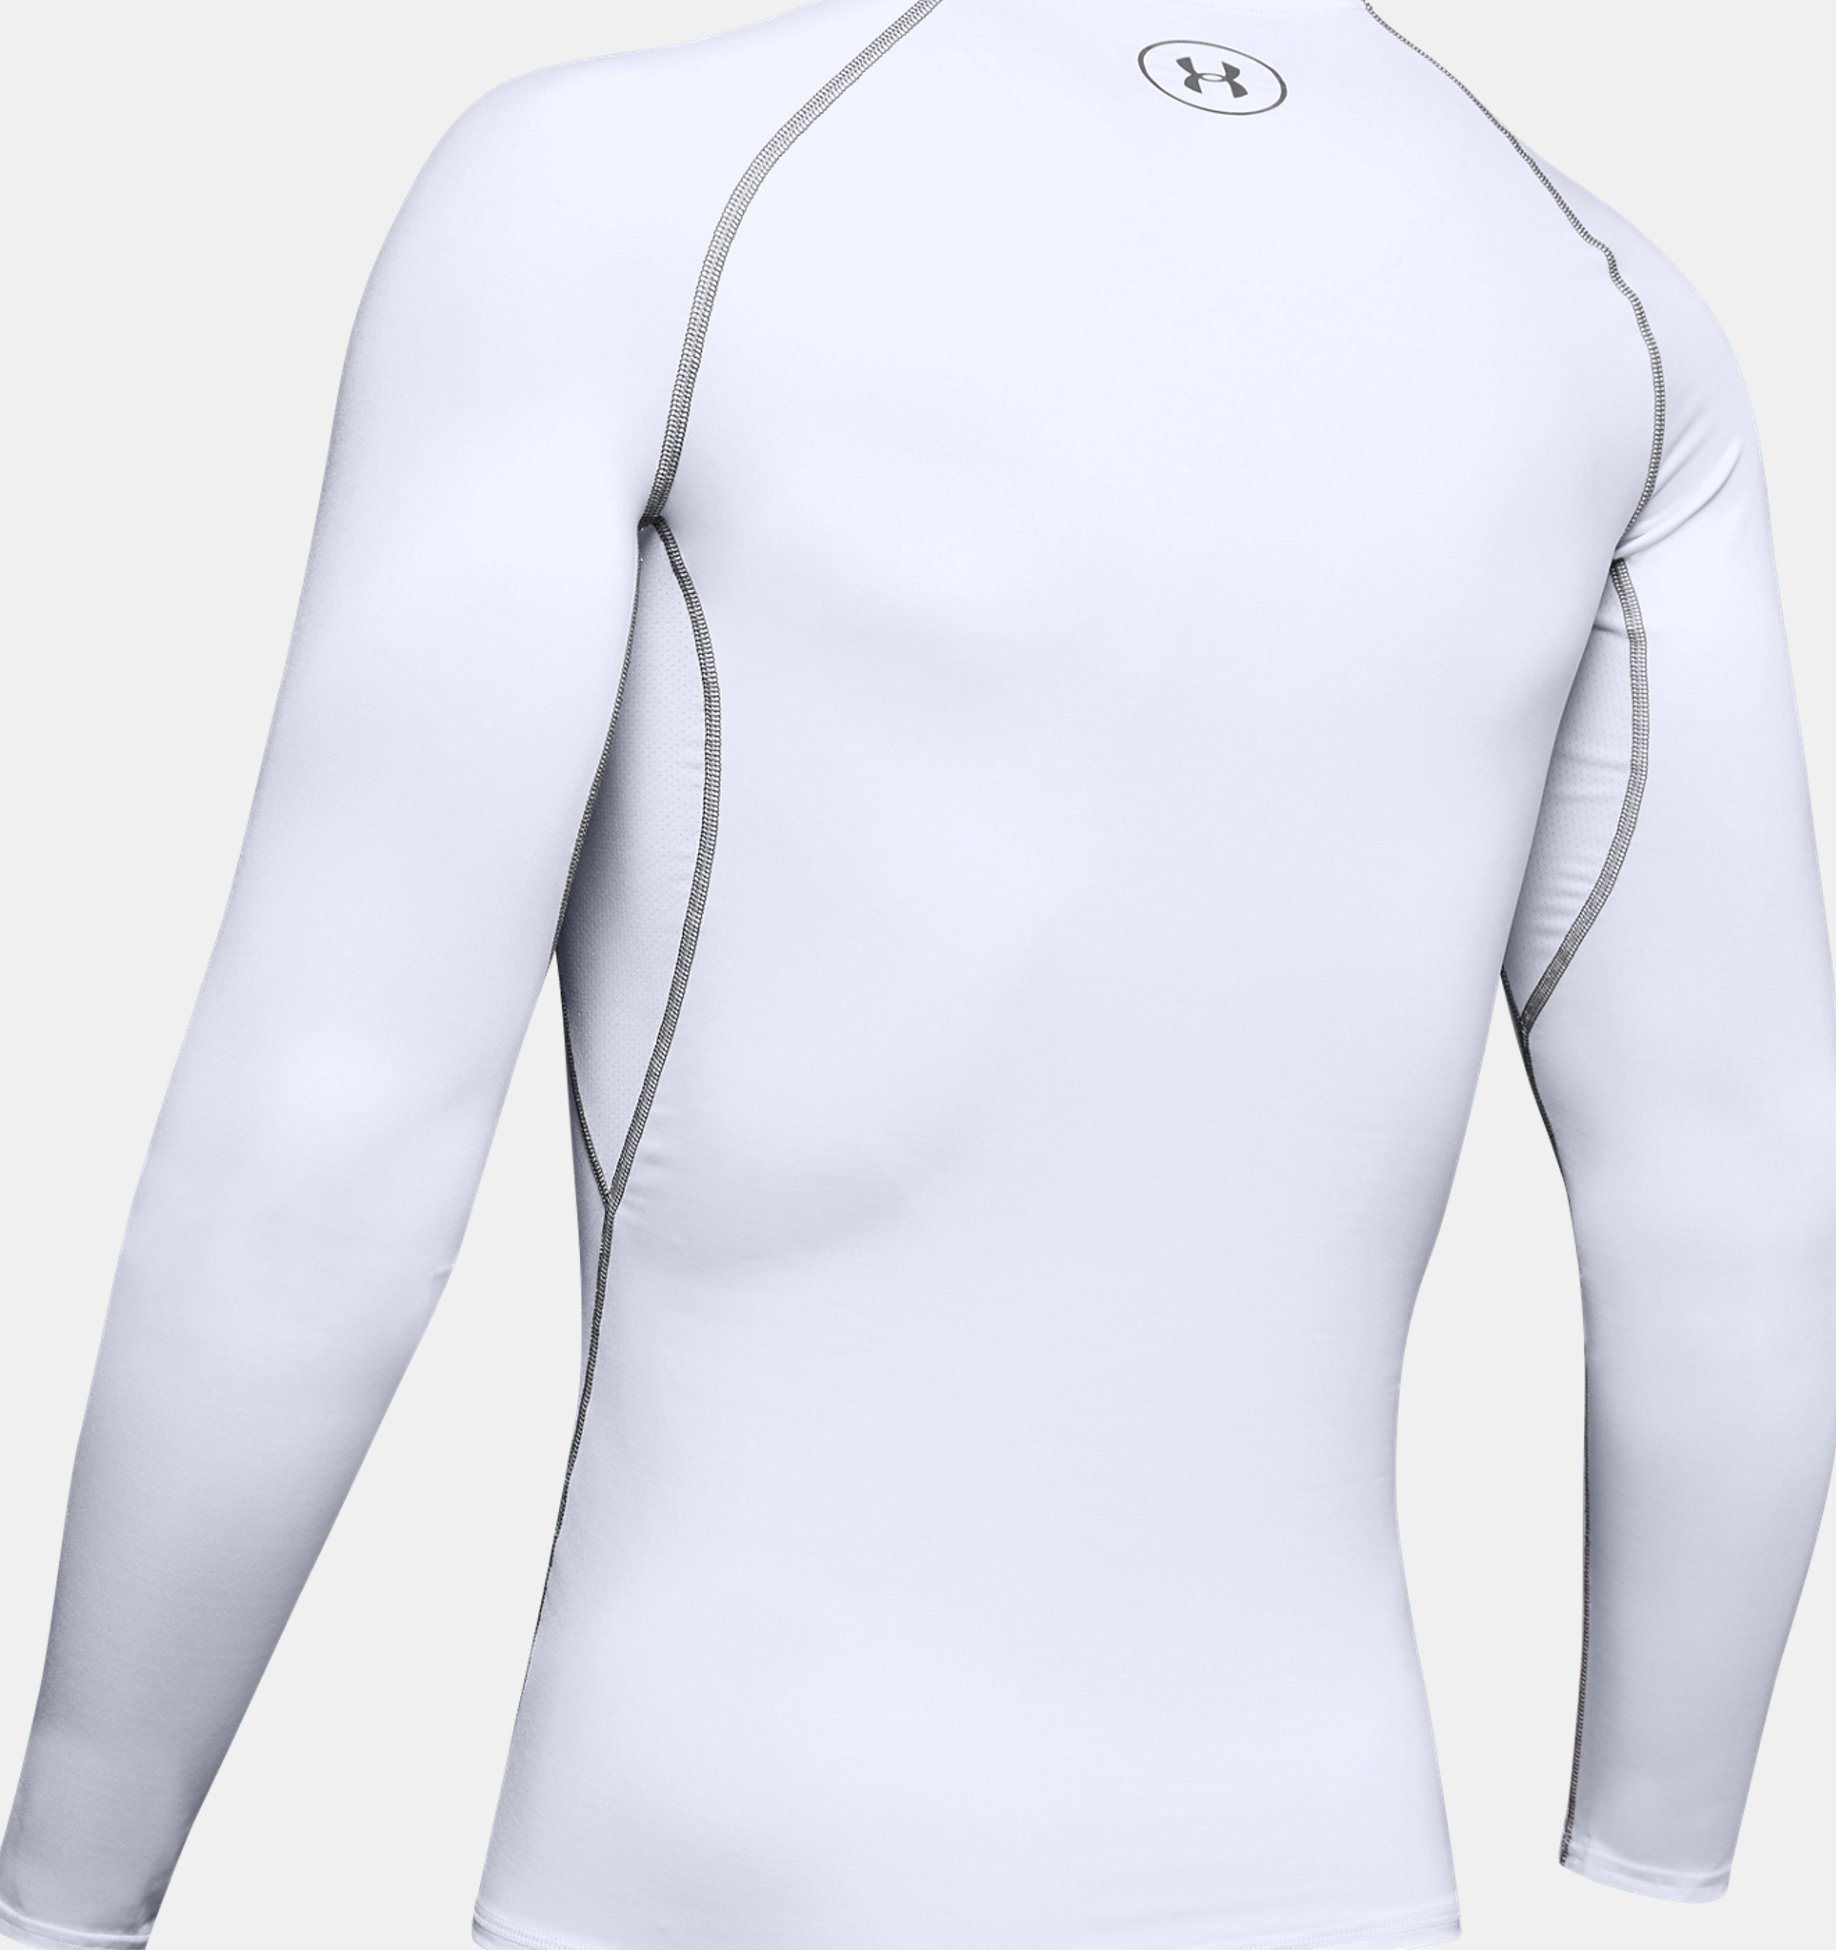 Under Armour BaseLayer Long Sleeve Compression Top UA007 